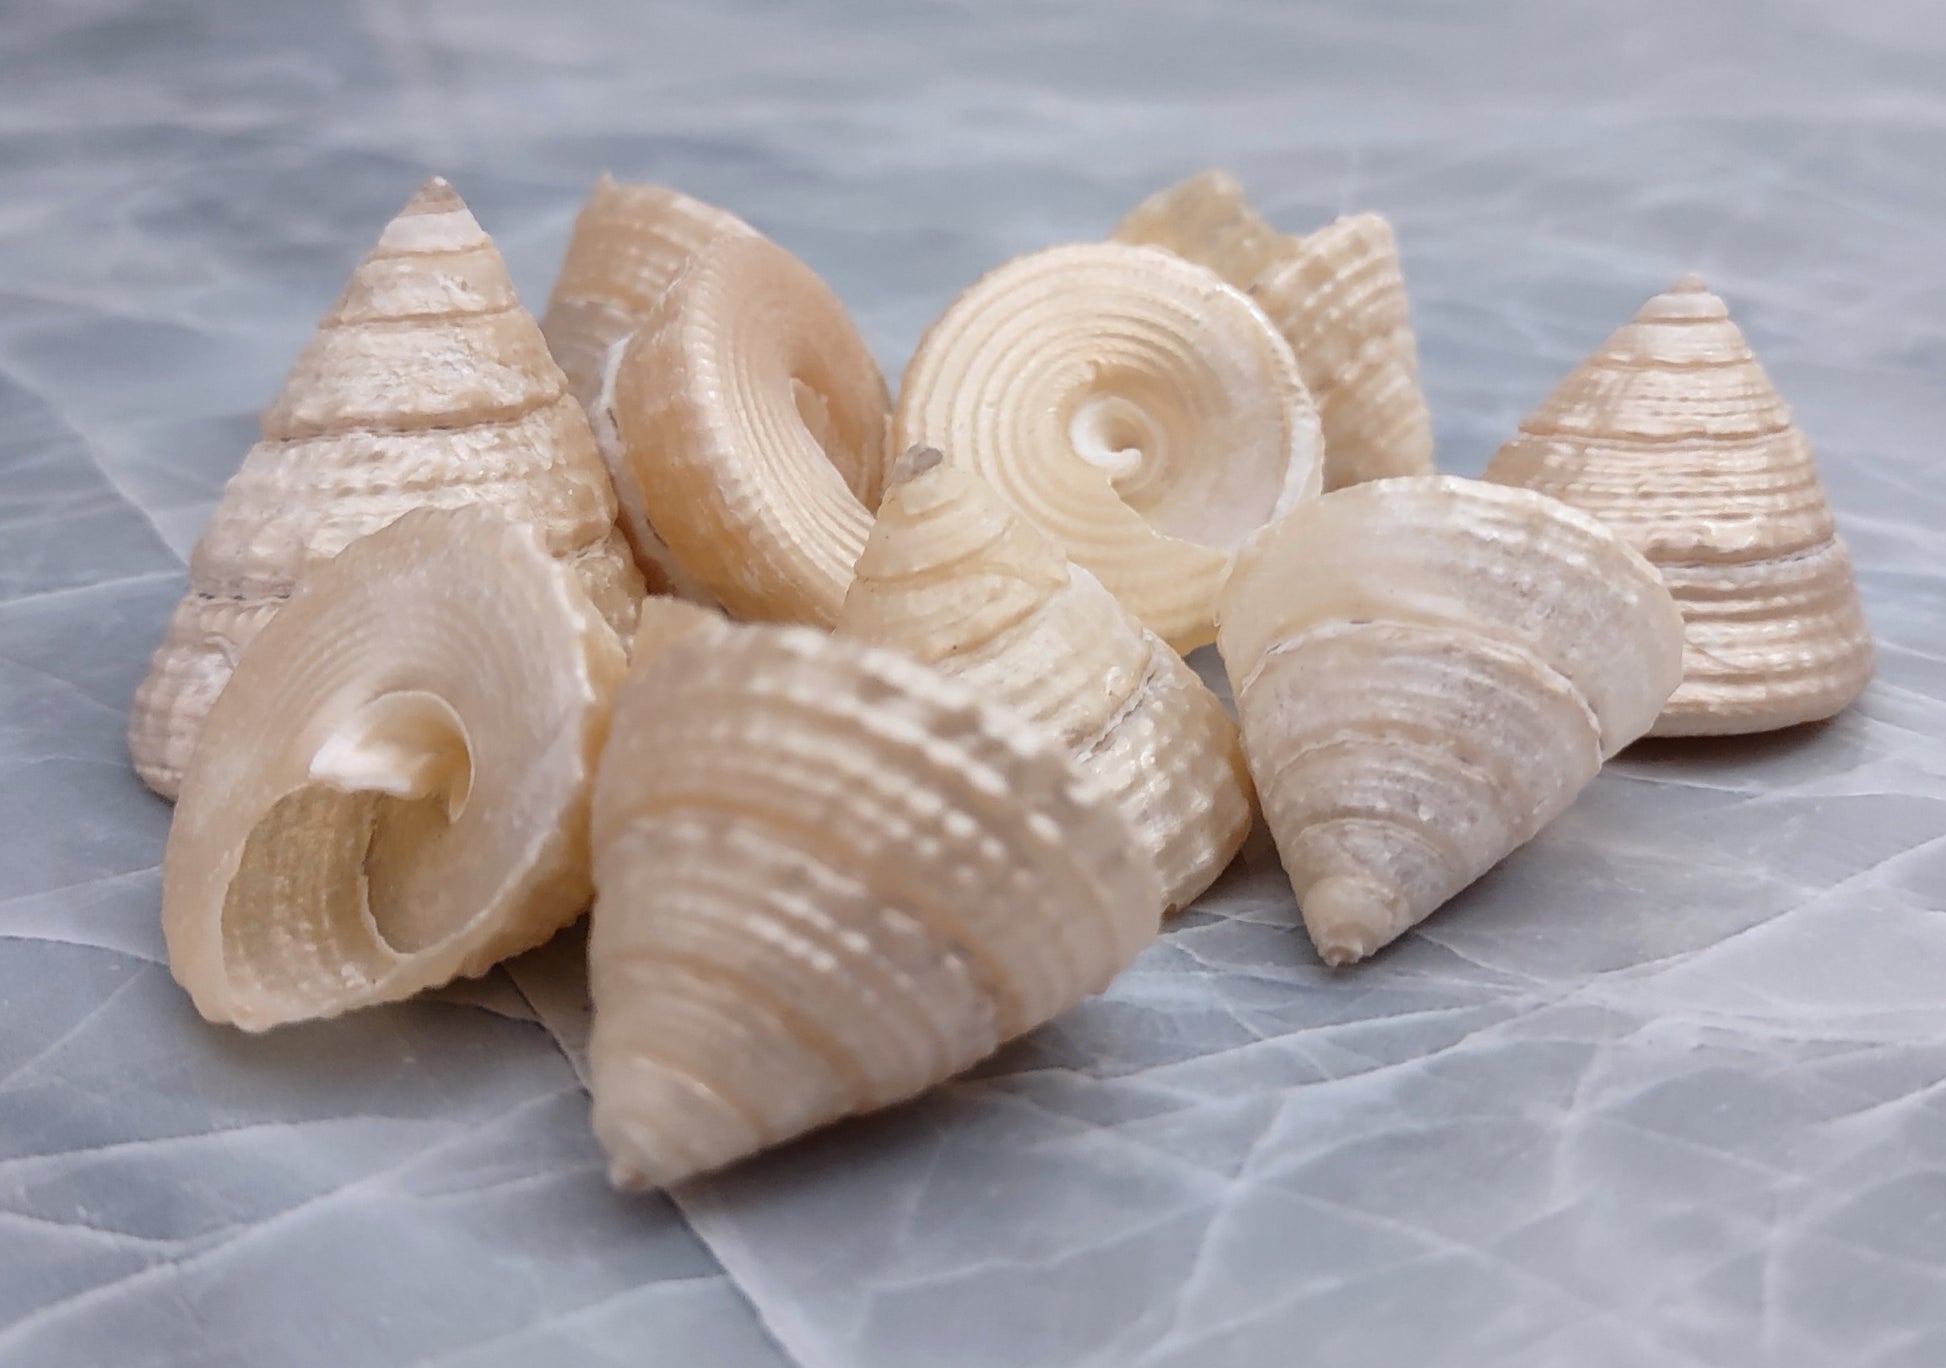 Pearlized Trochus Seashell - Trochus Niloticus - (10 shells approx. .75-1 inch). Multiple white shiny spiral shells in a grouping. Copyright 2022 SeaShellSupply.com.